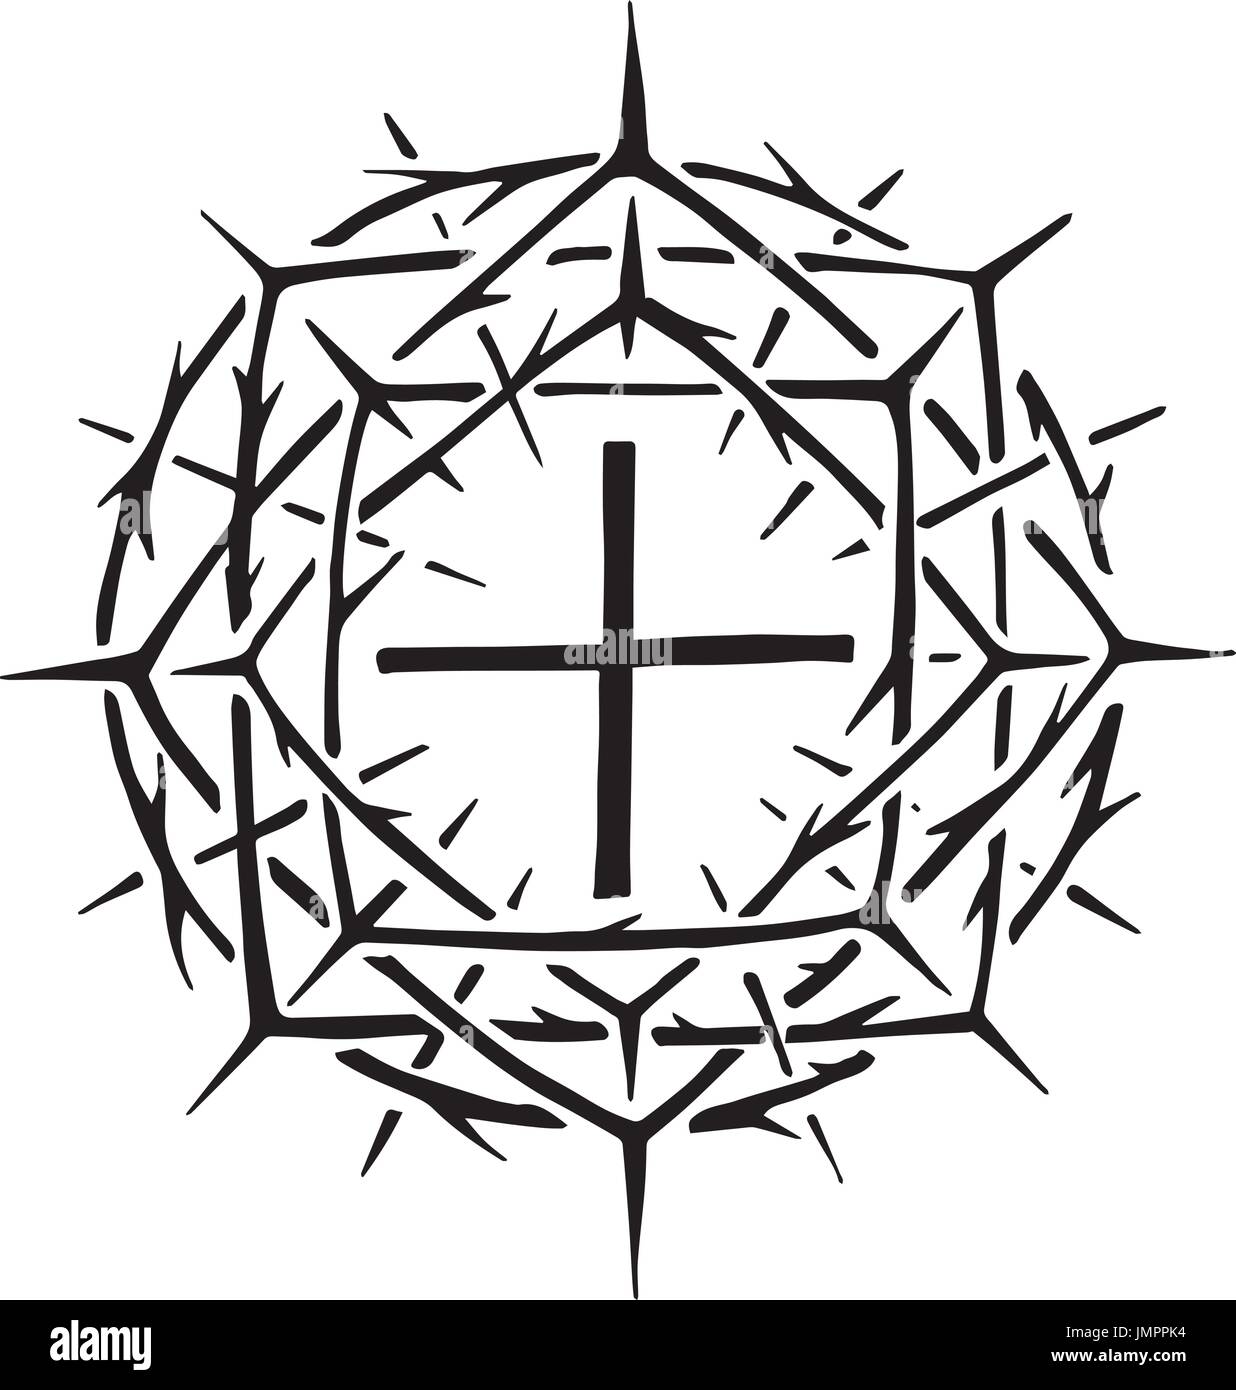 Hand drawn vector illustration or ink drawing of the Christian symbol of Jesus Christ Crown of thorns Stock Vector